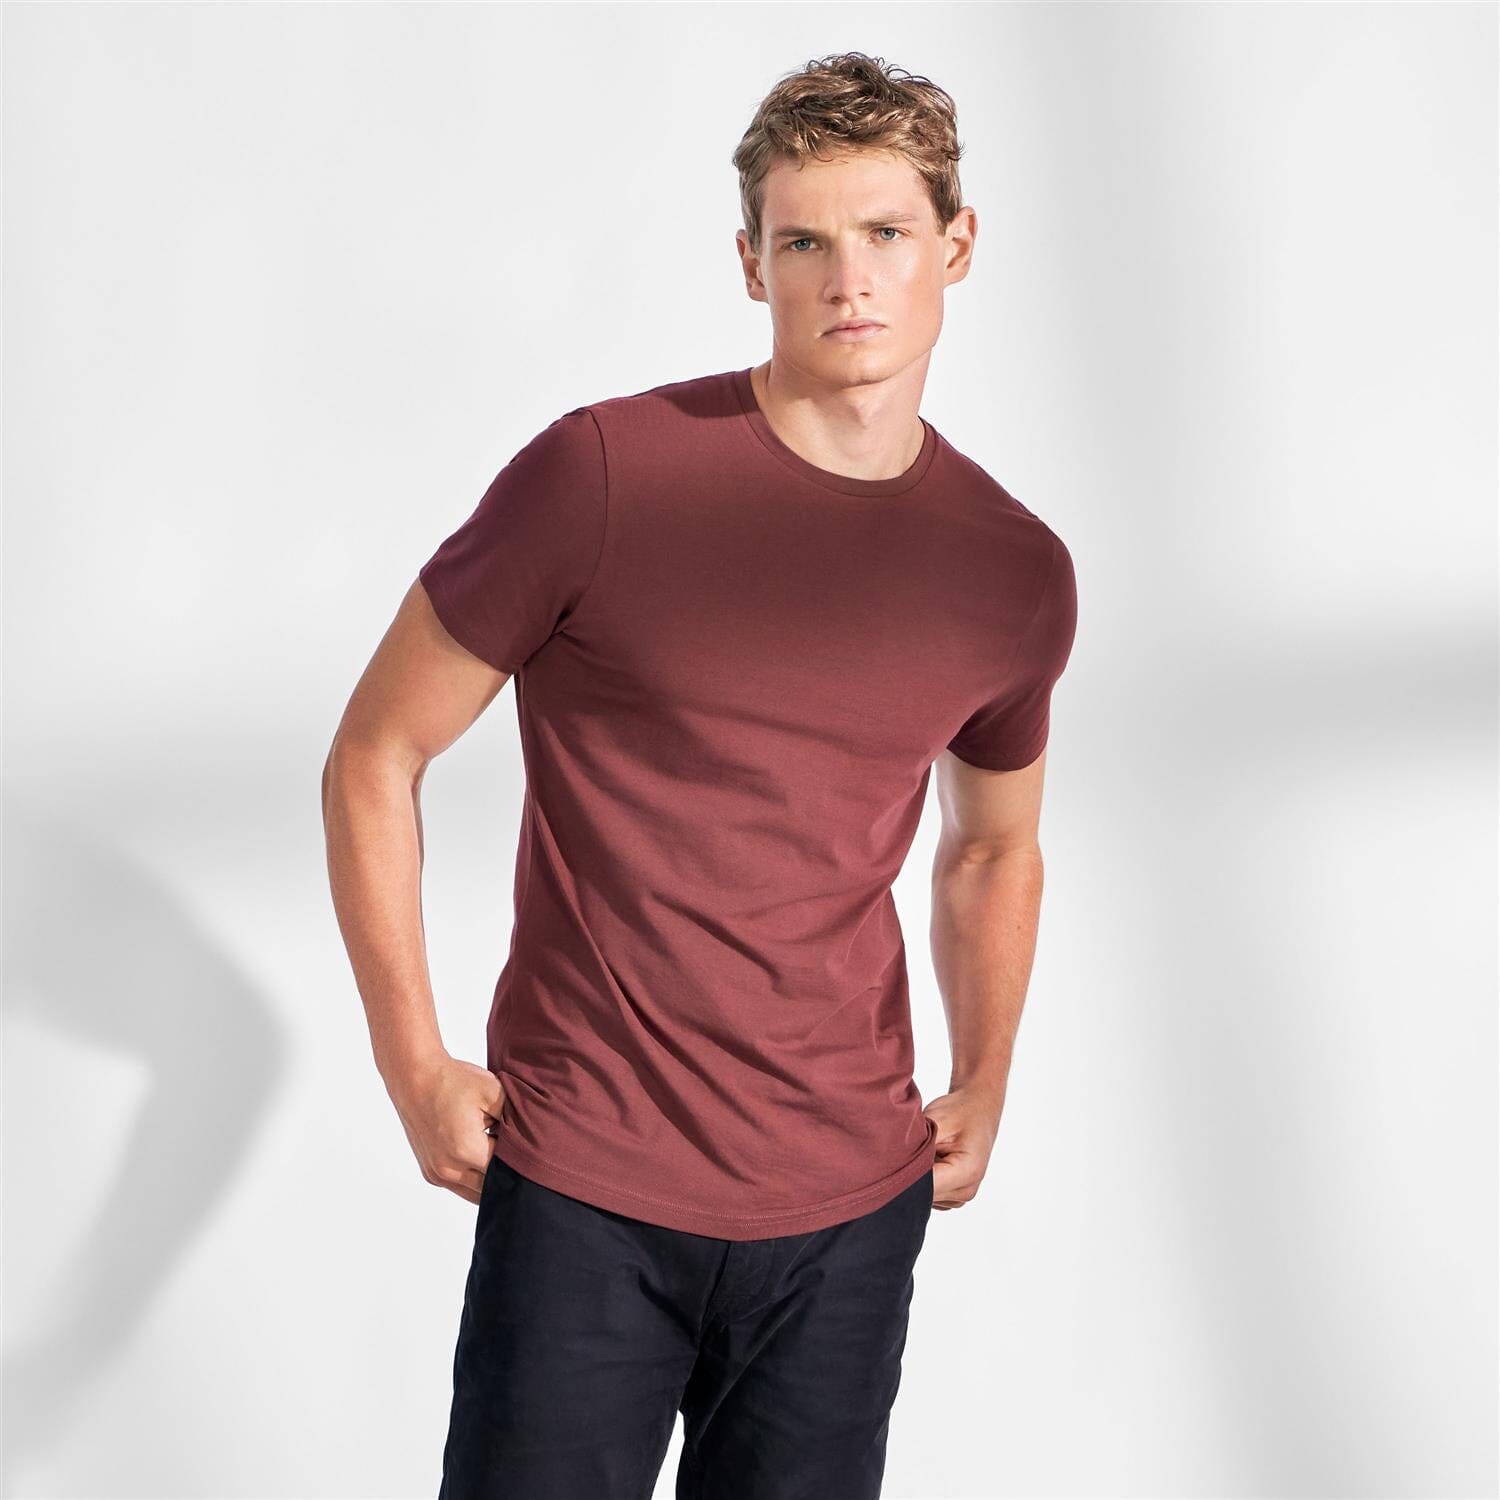 Bread and Boxers Man Cotton Crew-Neck Burgundy T-shirt